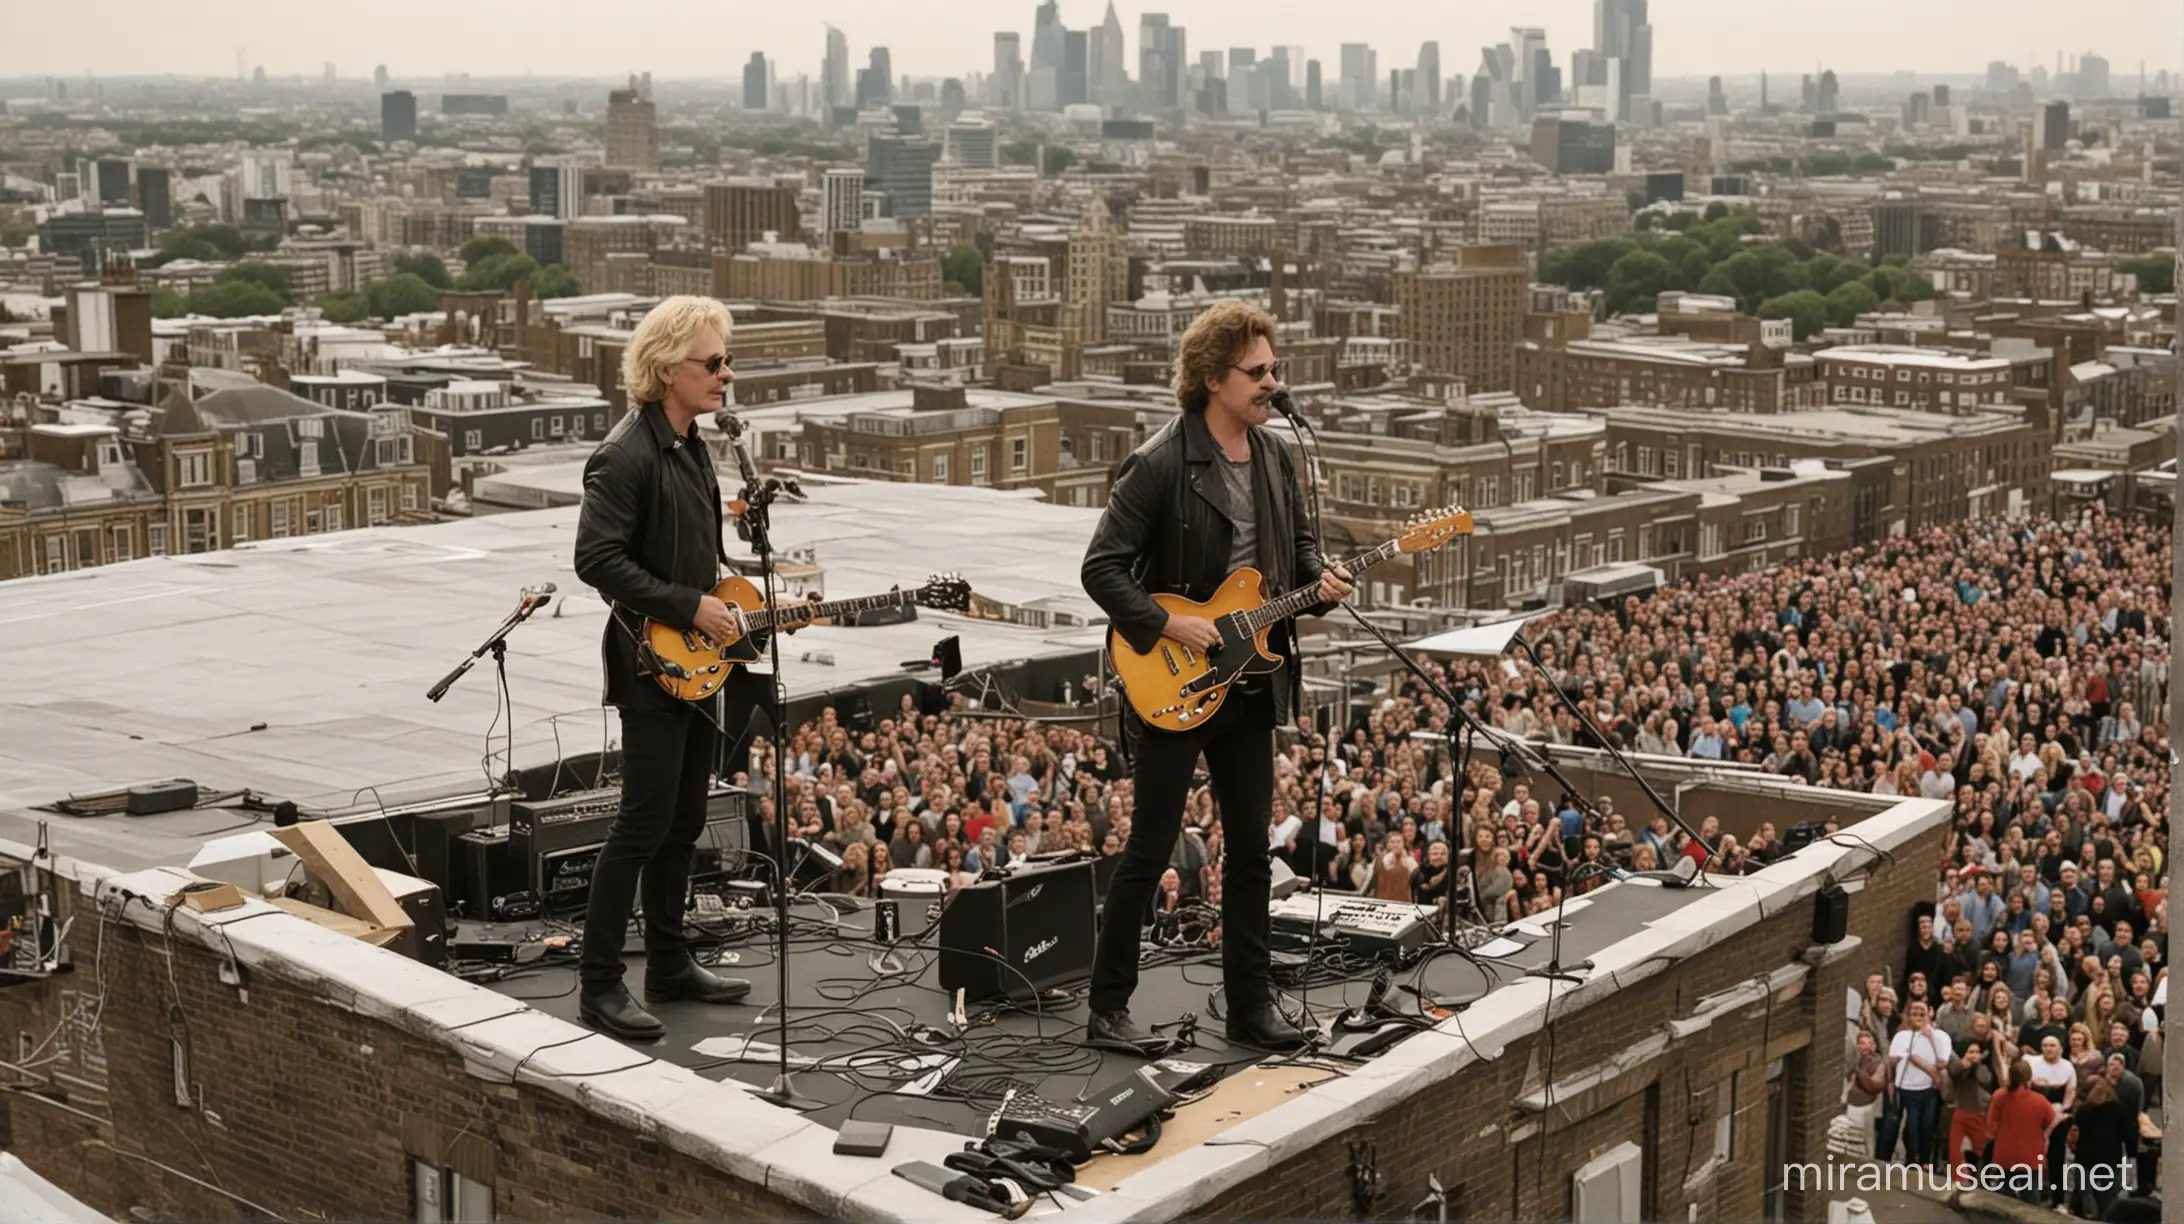 Hall Oates Performing Live on London Rooftop Concert